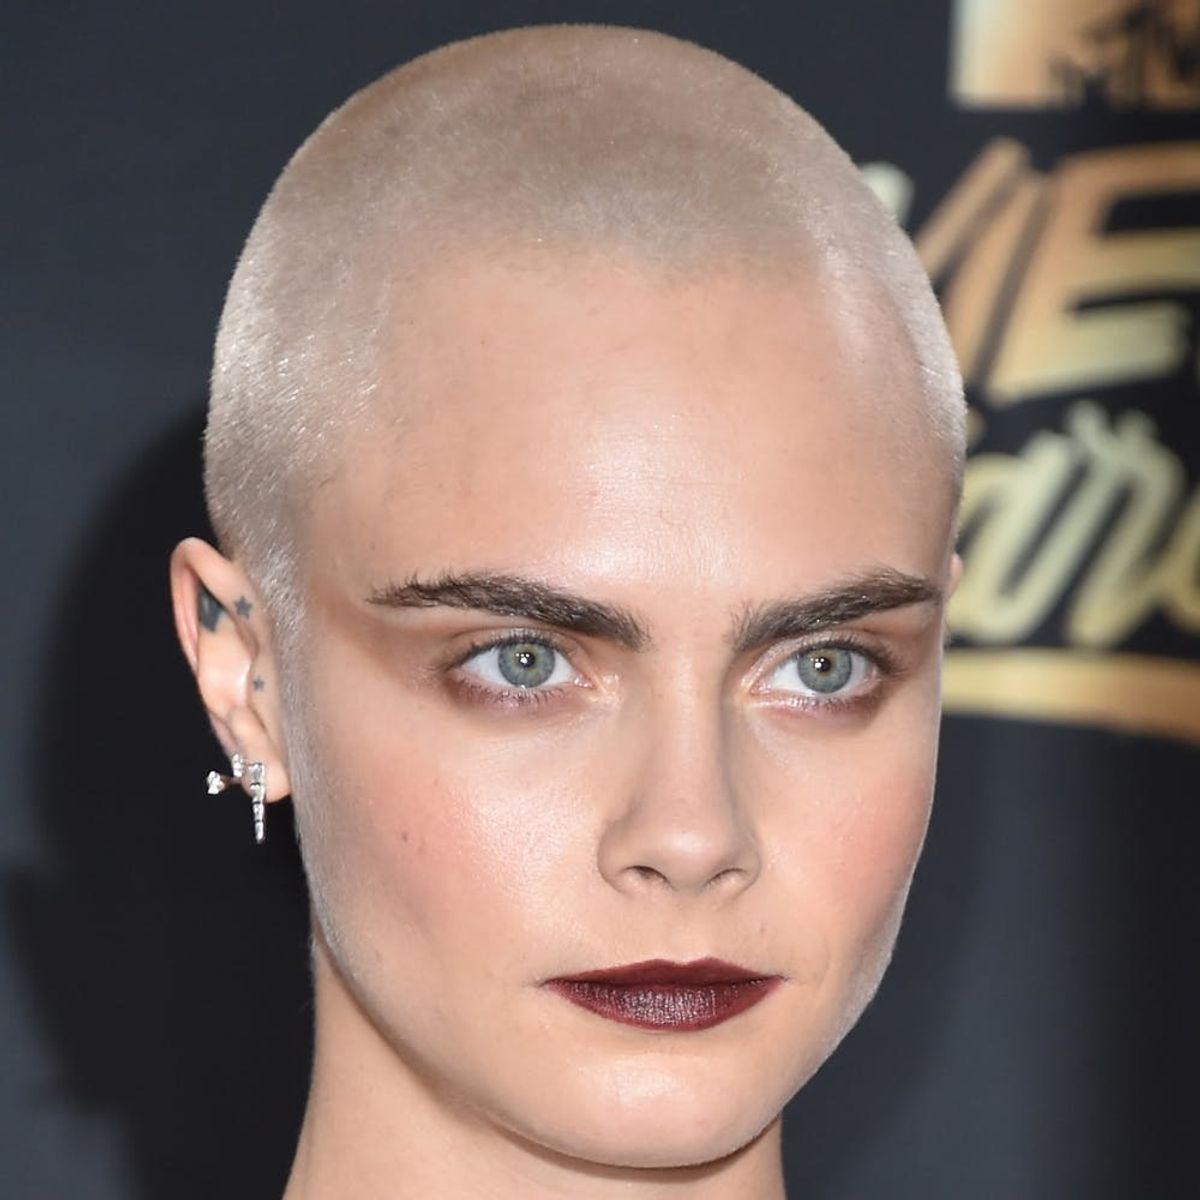 18 Female Celebs Who Rocked the Hell Out of a Shaved Head